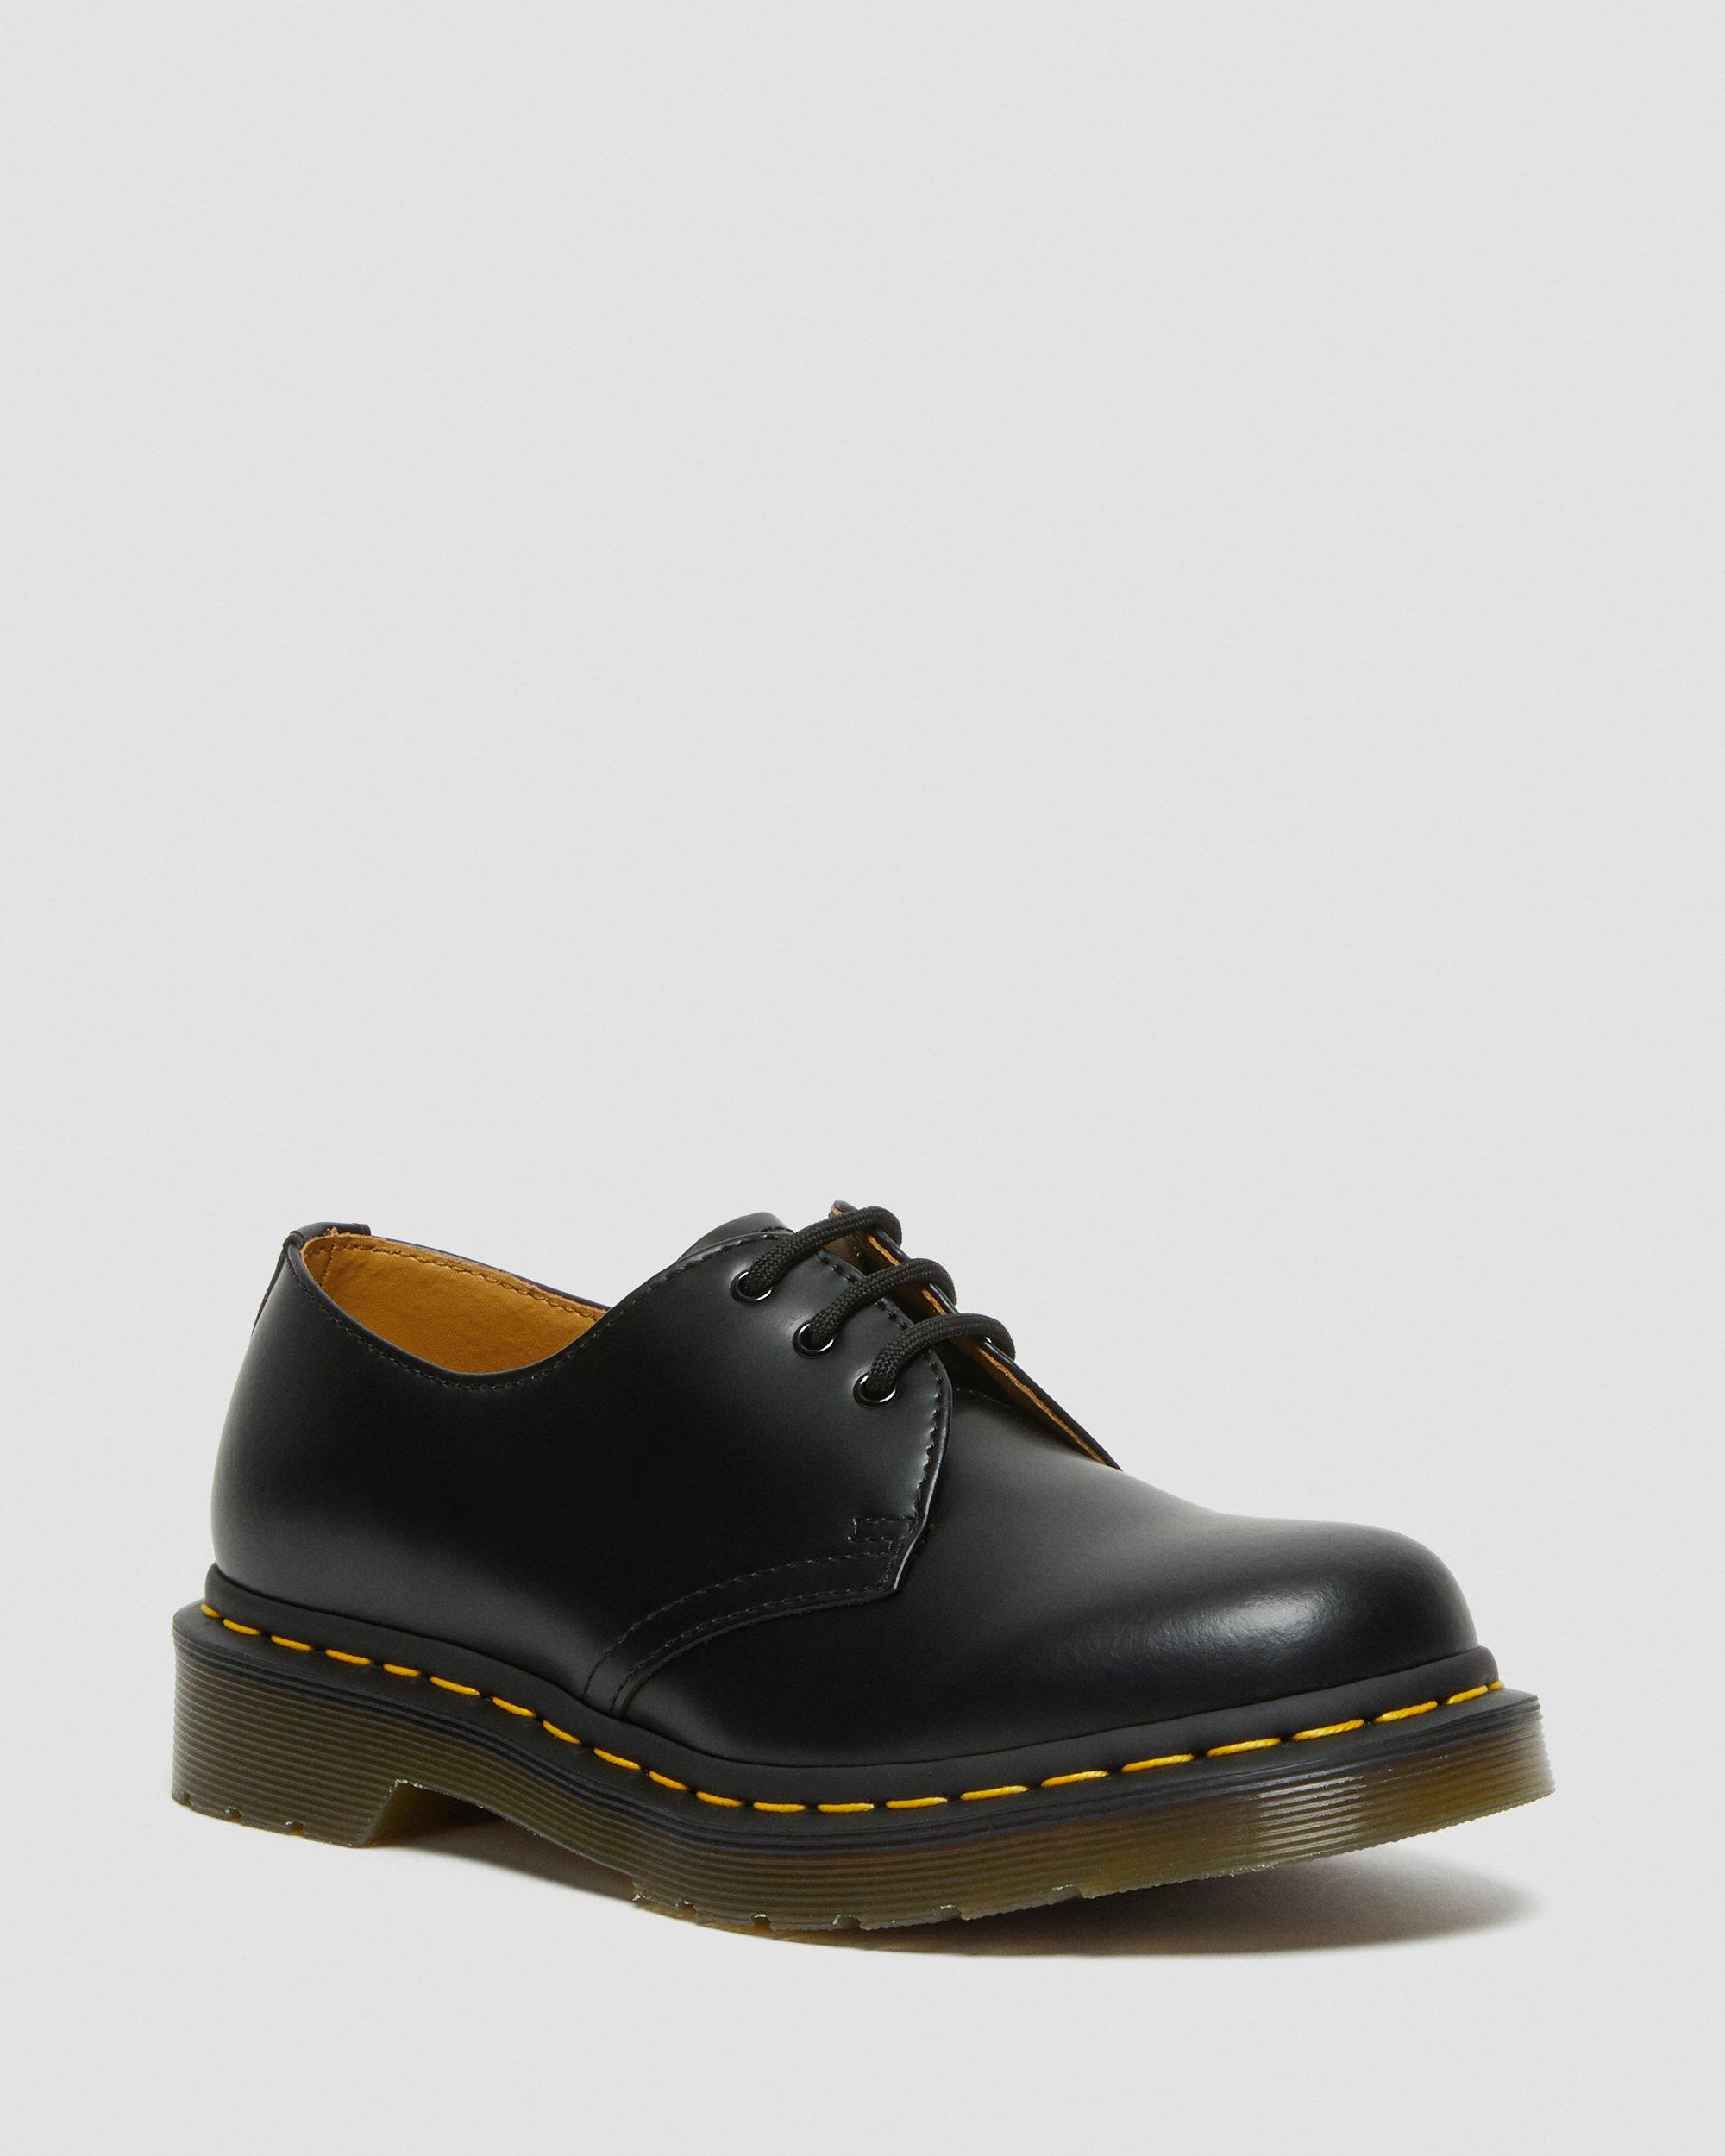 1461 Women's Smooth Leather Oxford Shoes in Black